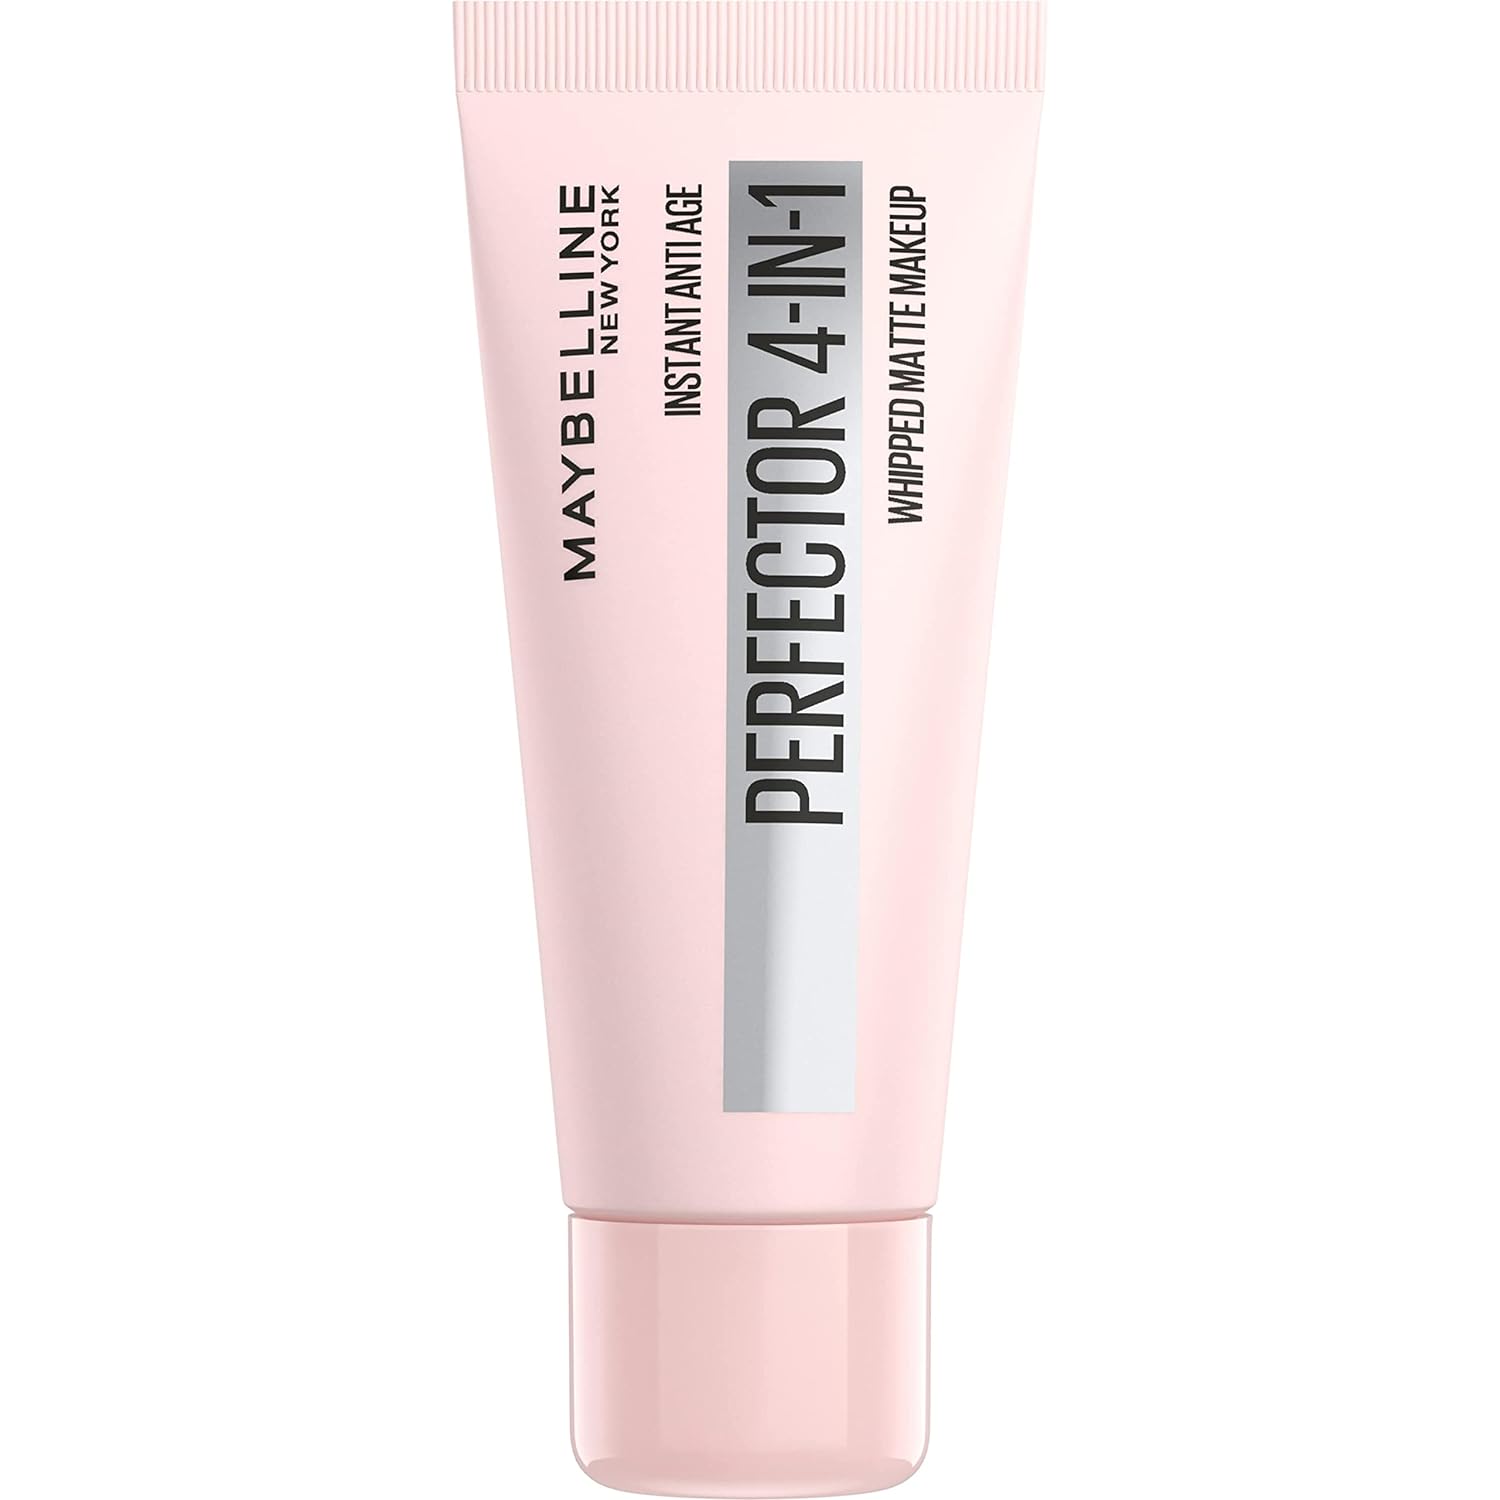 Maybelline Instant Age Rewind Instant Perfector 4 in 1, Blur, Conceal, Even Skin, Mattify, Light